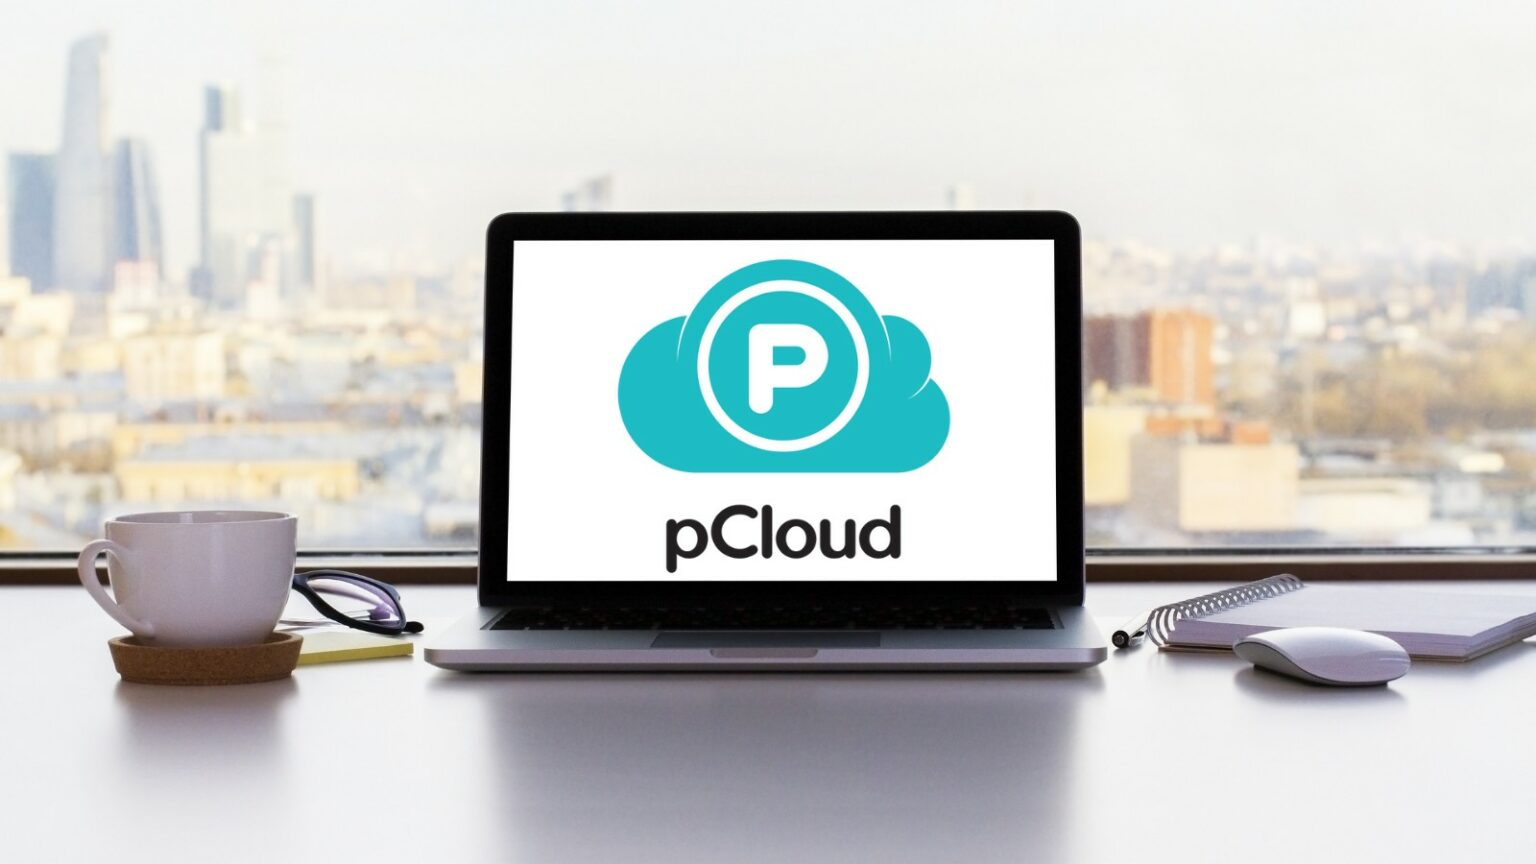 pCloud has a new family plan with 10TB of cloud storage -- and you can get up to 80% off the price!